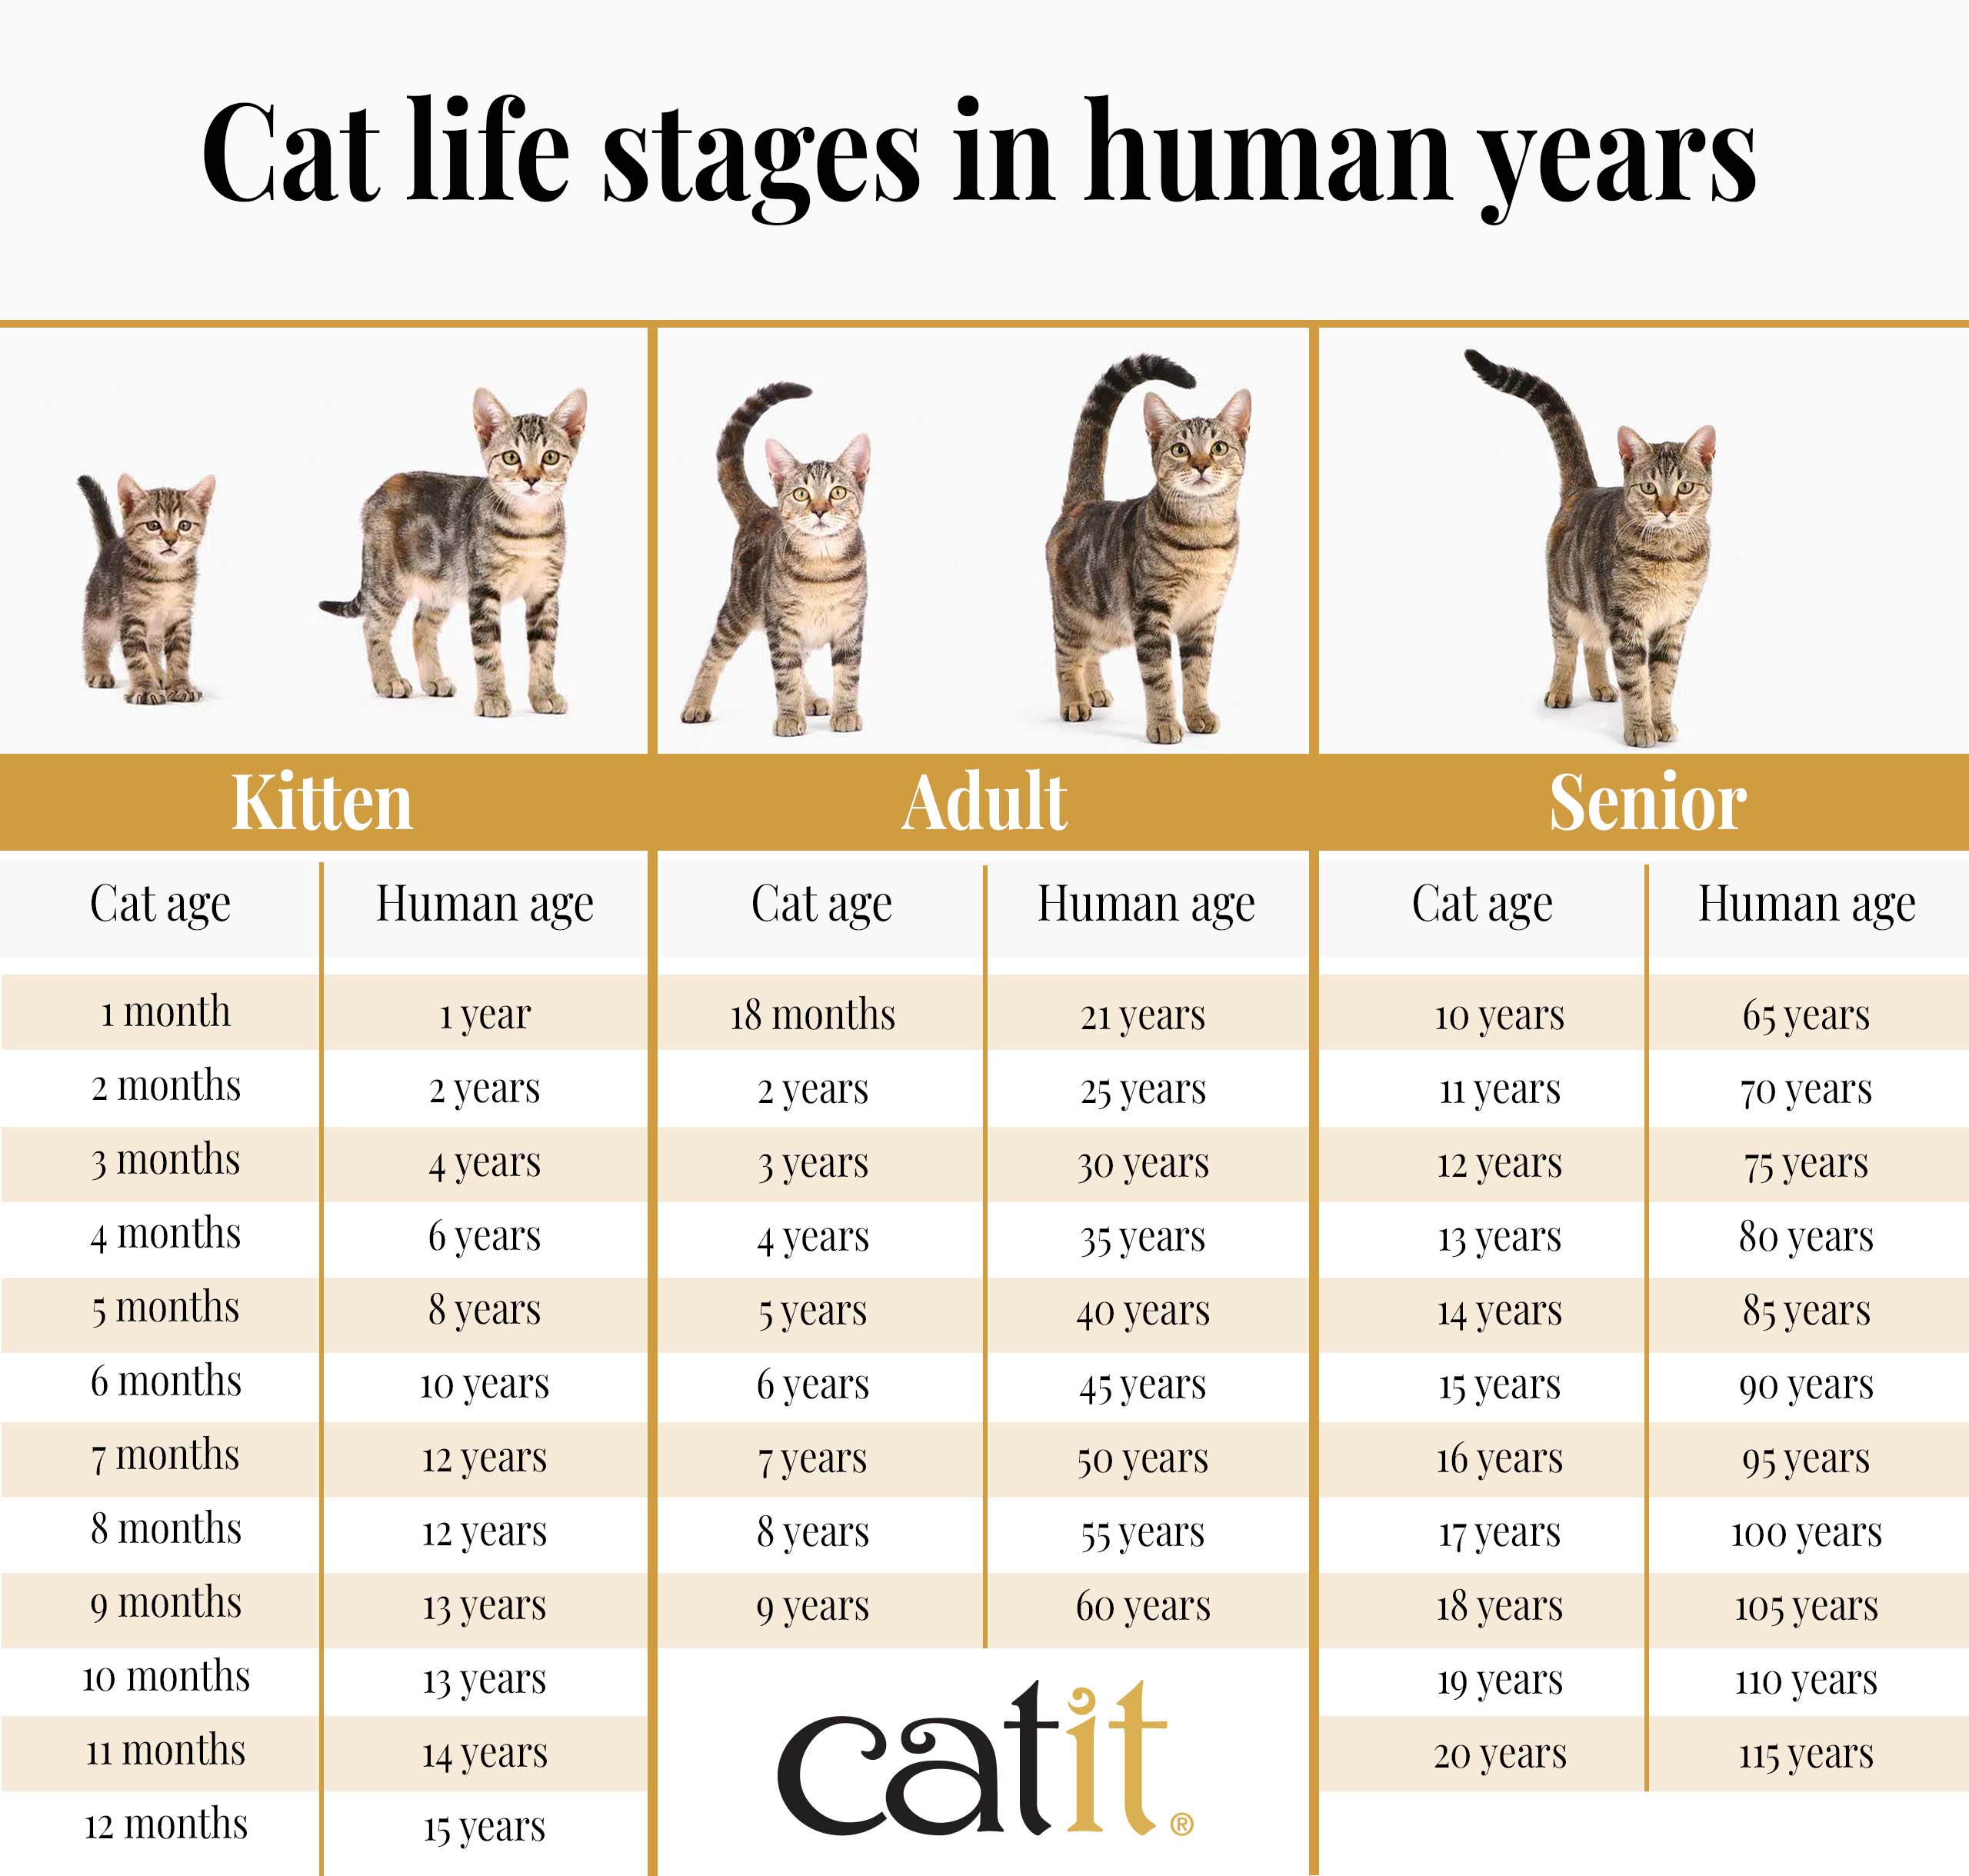 Cat life stages in human years